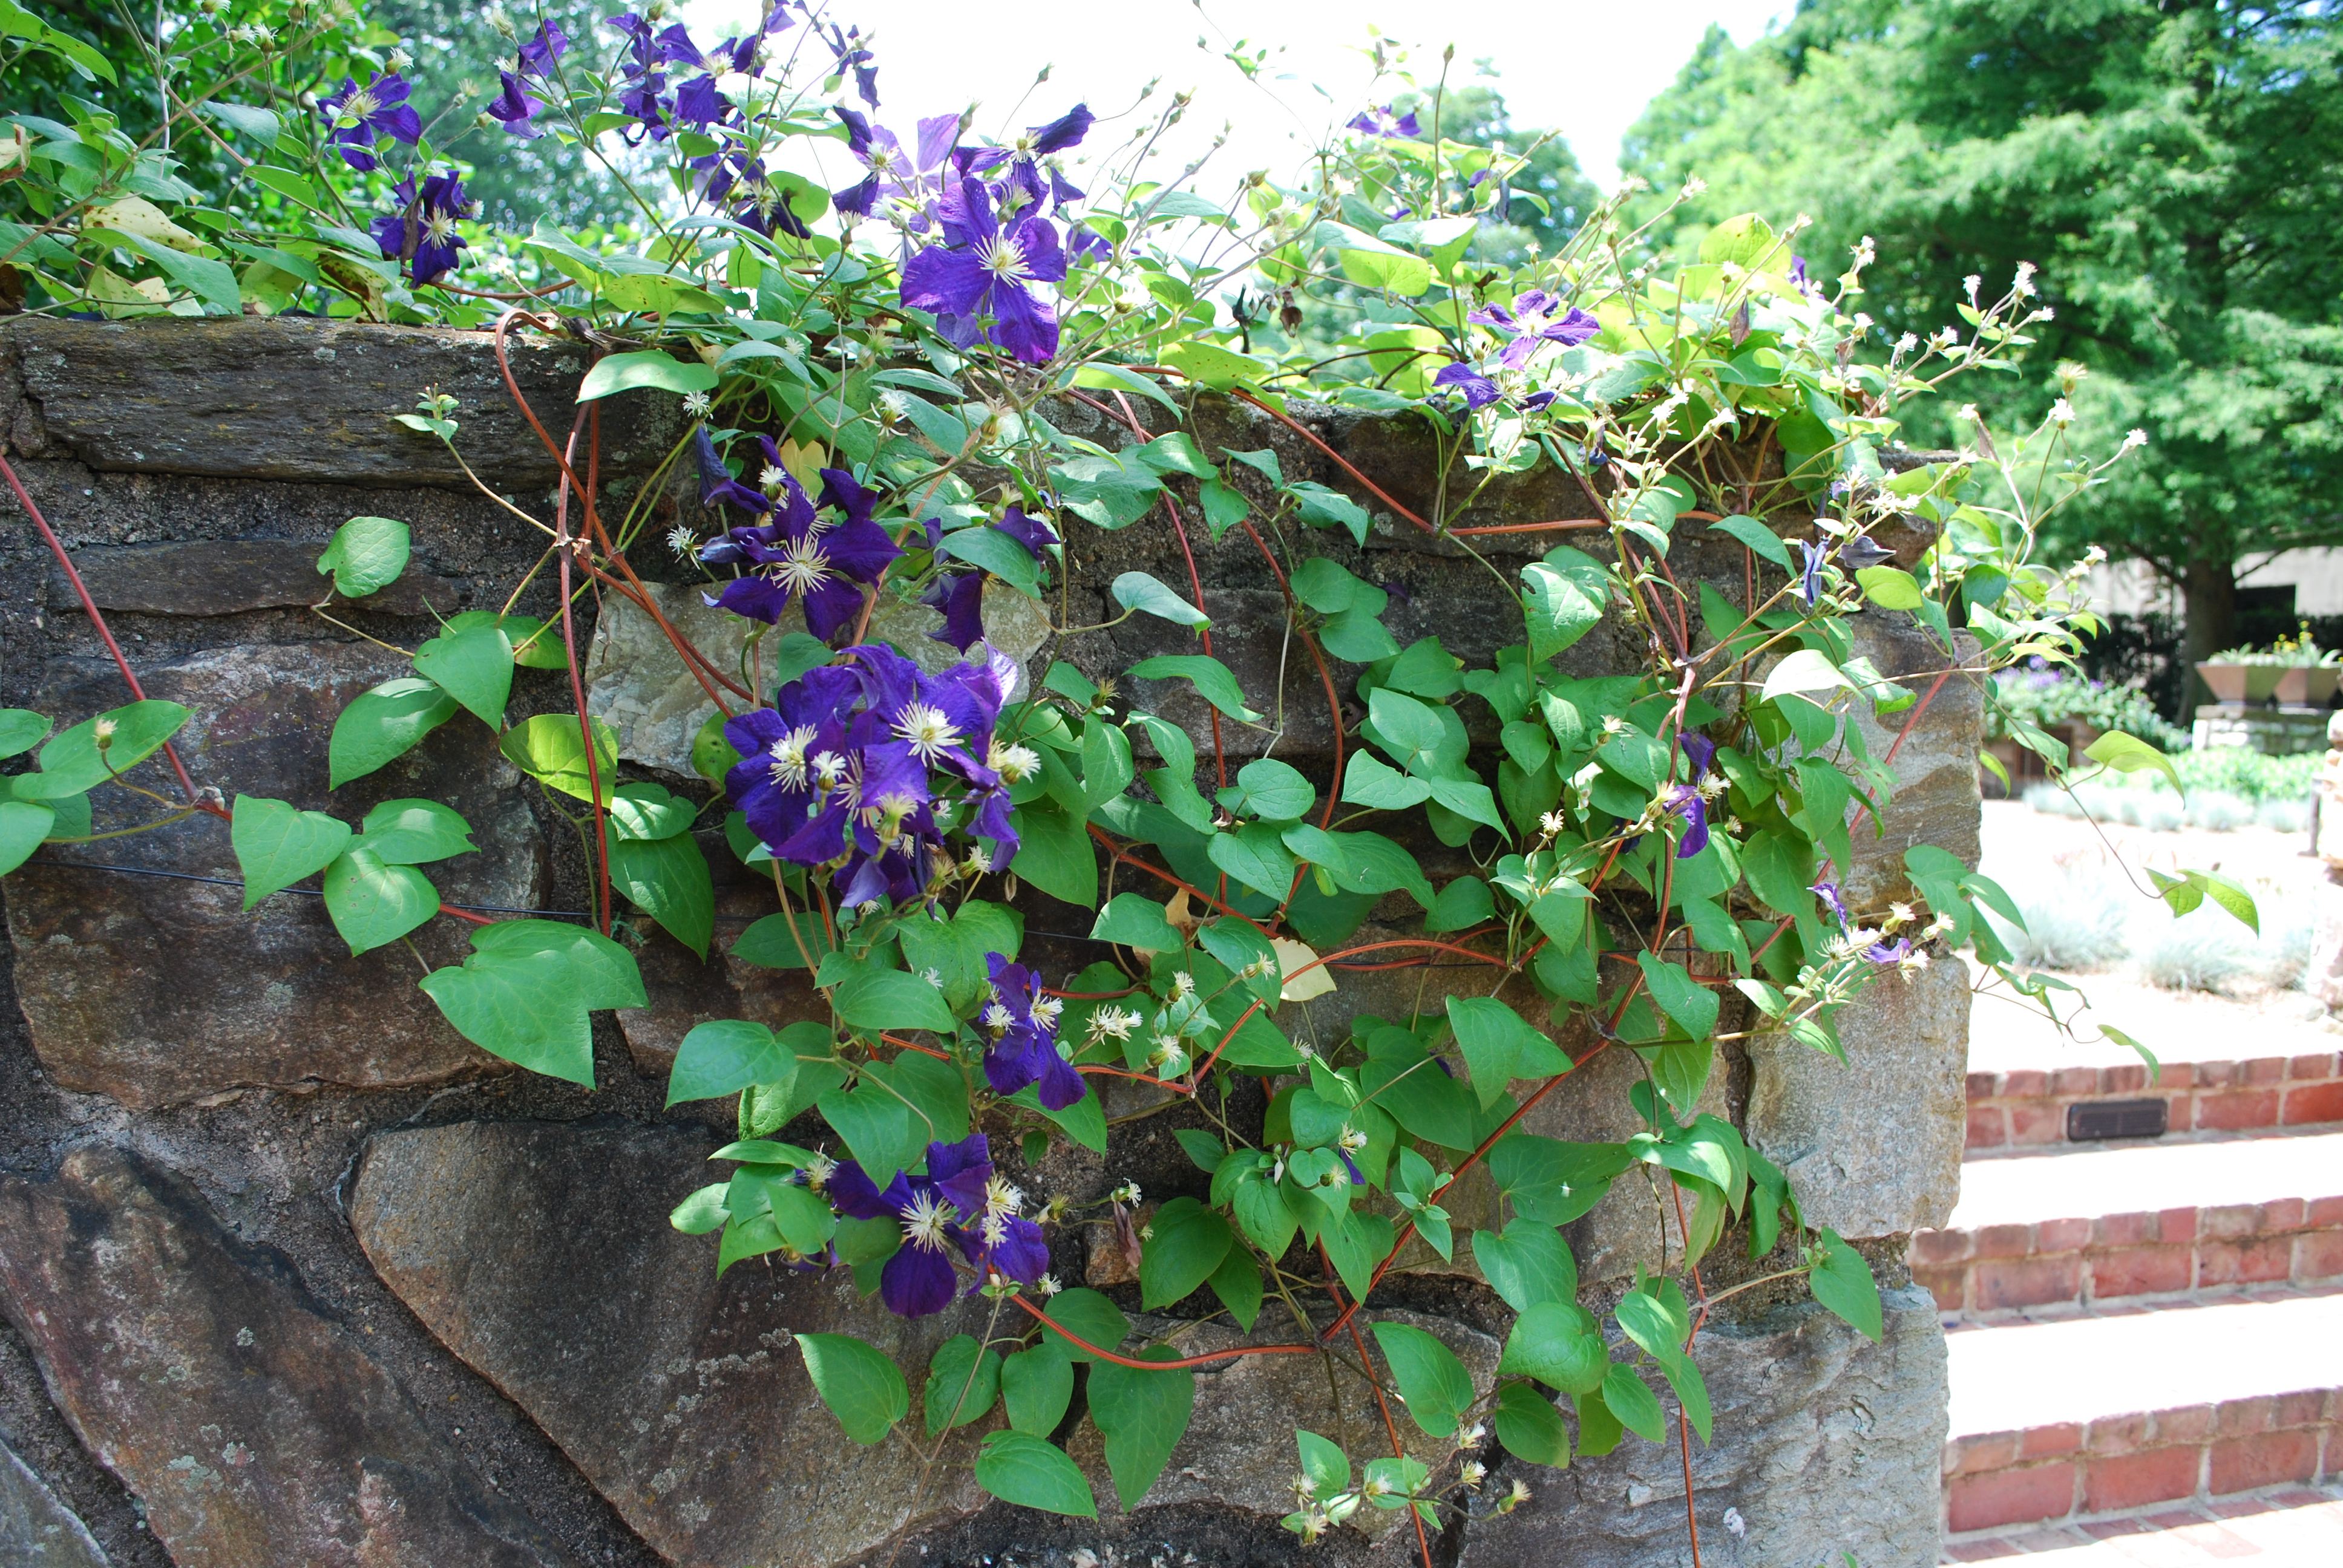 flowering vines york new the vines contrast which planter flowering they stone These add to on